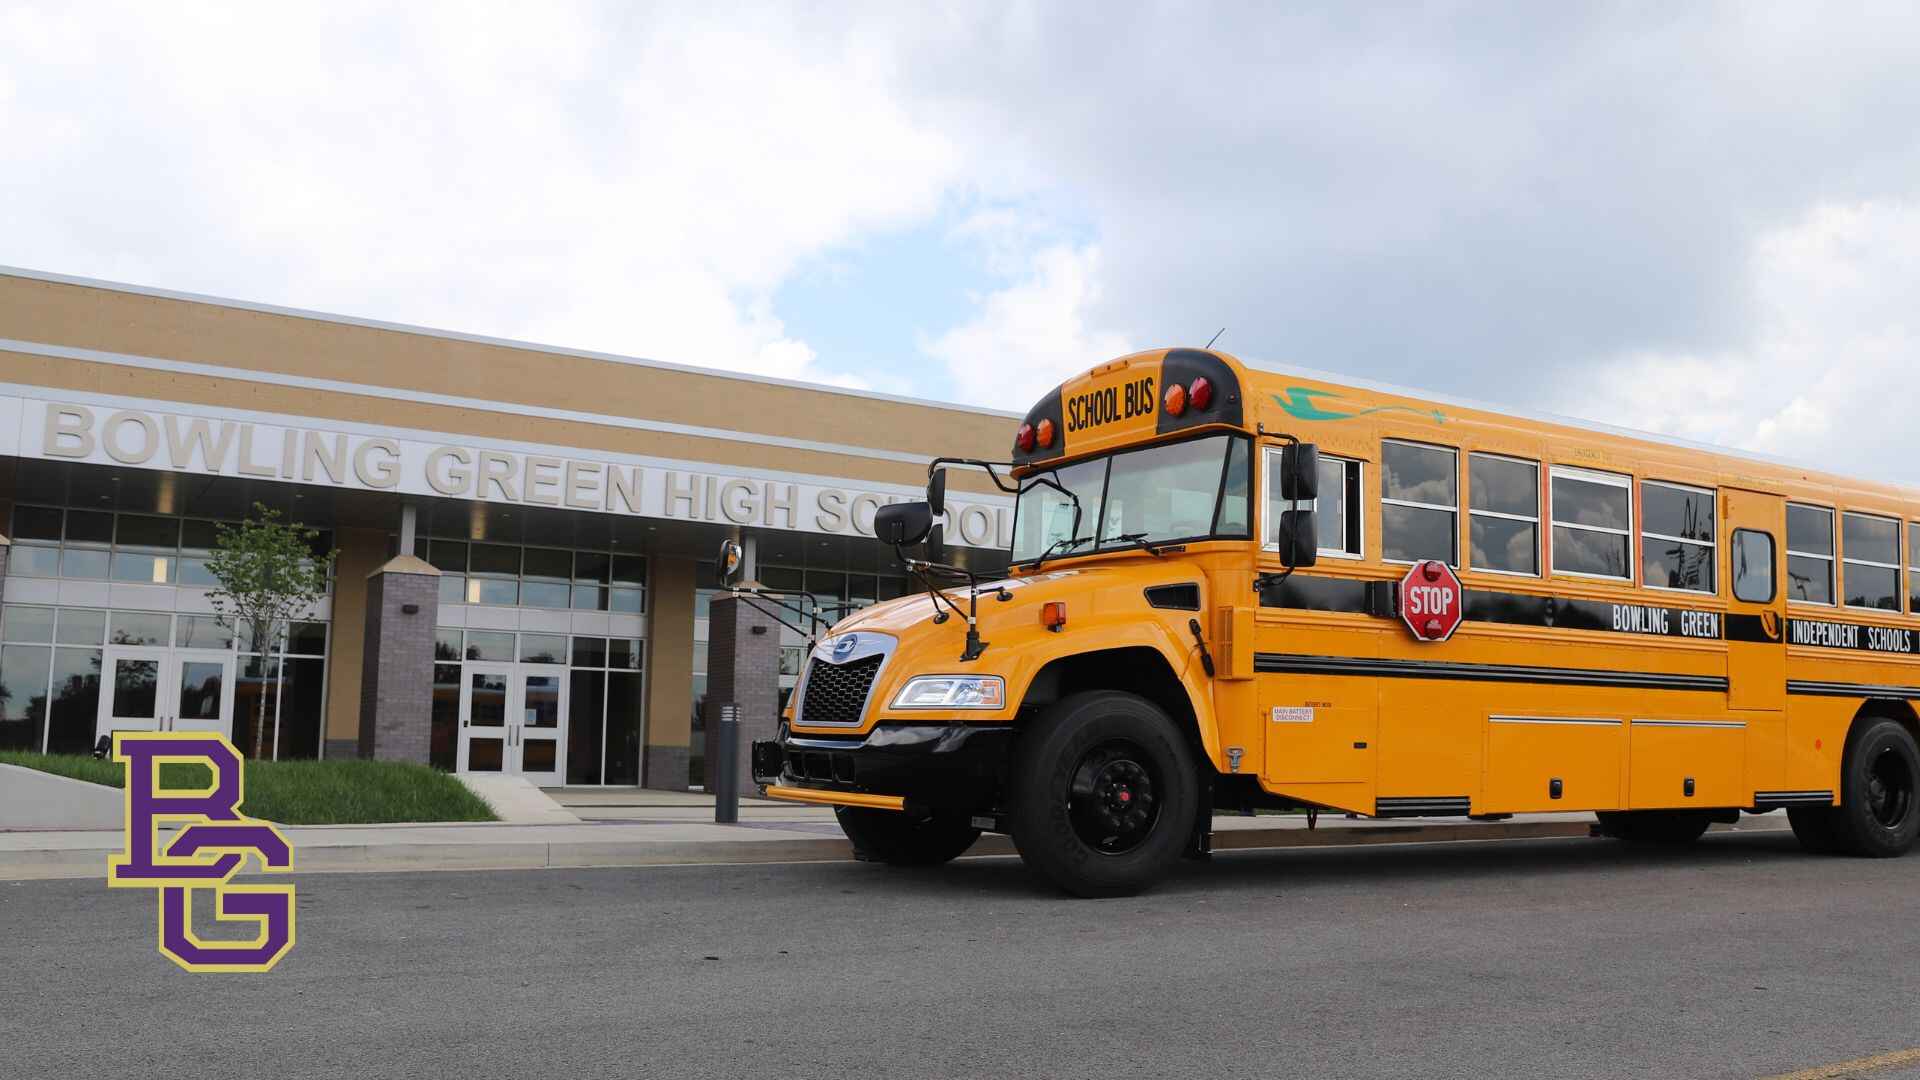 Blue Bird is delivering 13 electric, zero-emission school buses to the Bowling Green Independent School District (BGISD) in Kentucky